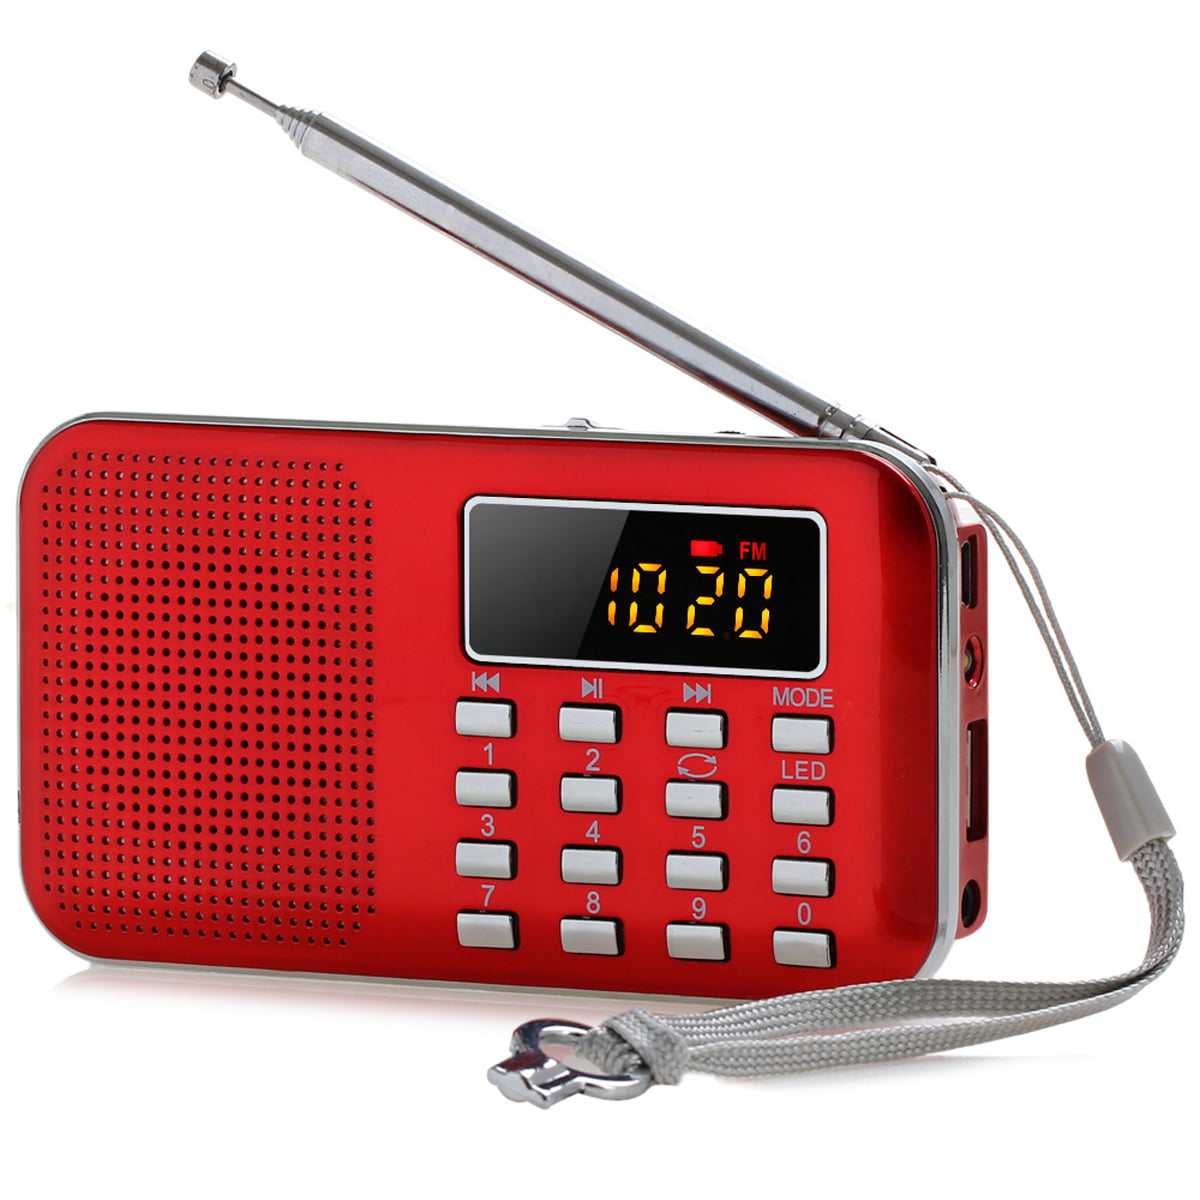 LEFON Multifunction Digital FM Radio Media Speaker MP3 Music Player Support TF Card USB Drive with LED Screen Display and Setting Timing Shutdown Function Red 